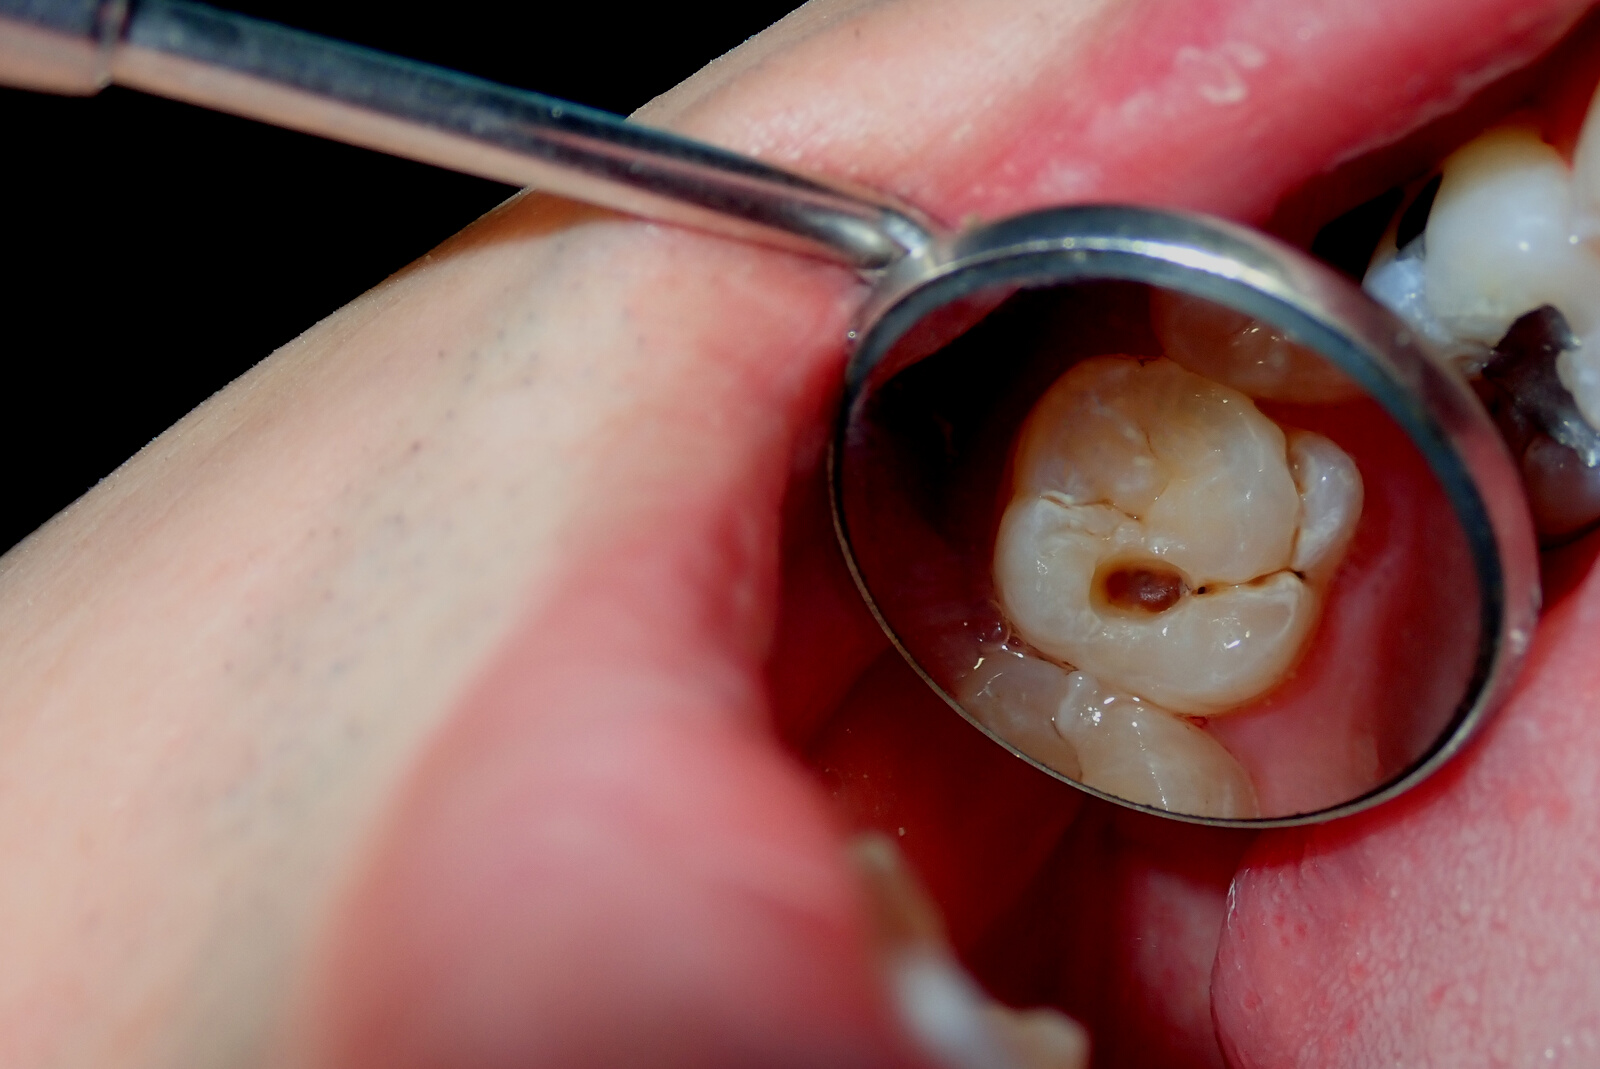 A dental tooth decay cavity found during routine dental examination check up using a dental mirror